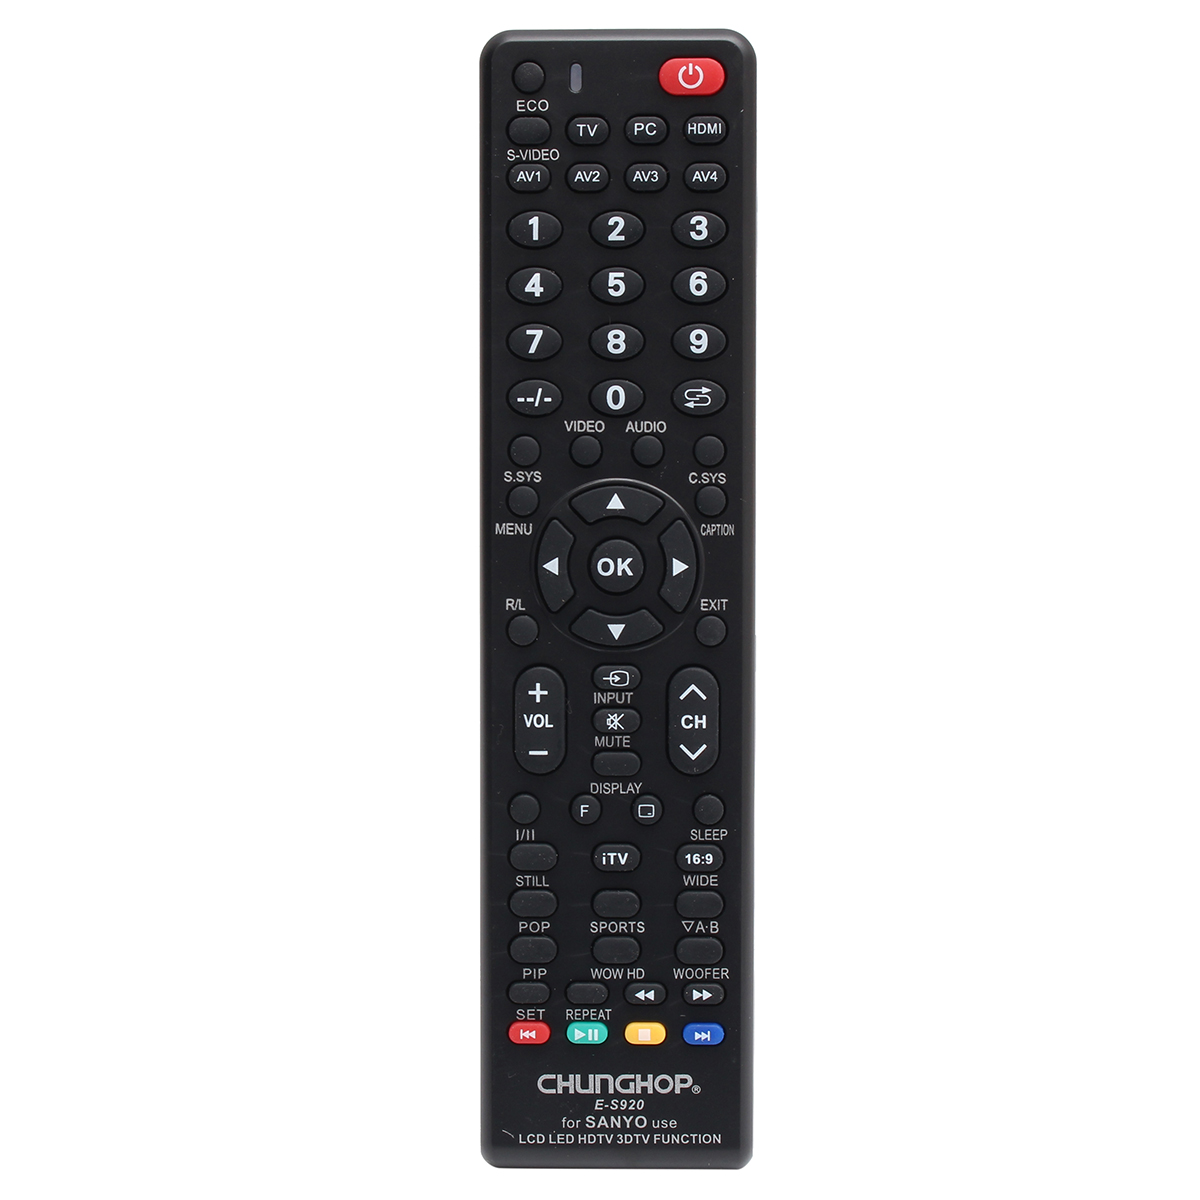 

Chunghop E-S920 Universal Replacement Remote Control For SANYO TV Smart LCD LED HDTV 3DTV